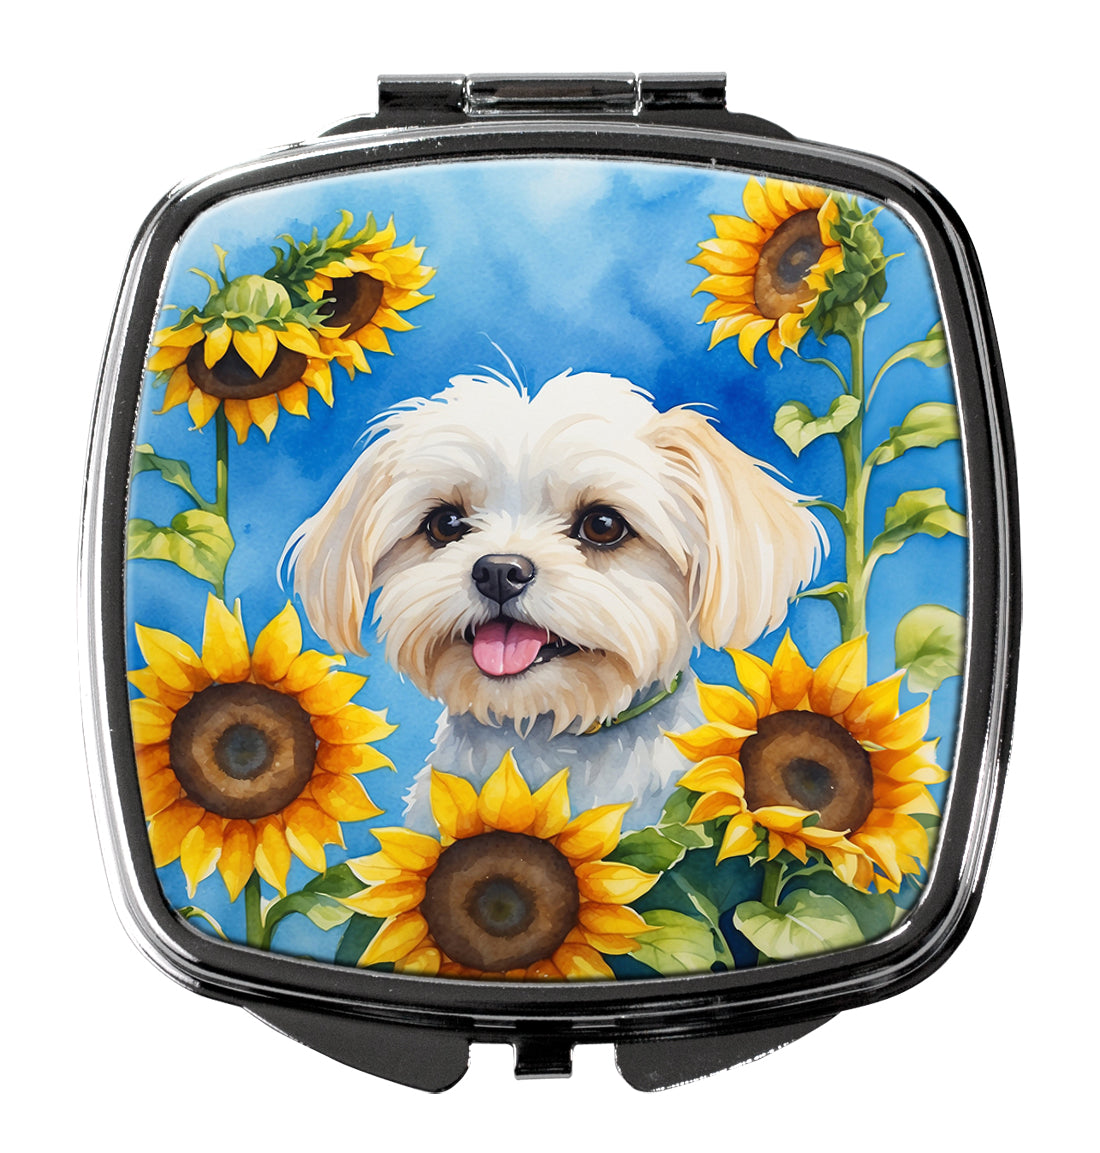 Buy this Maltese in Sunflowers Compact Mirror